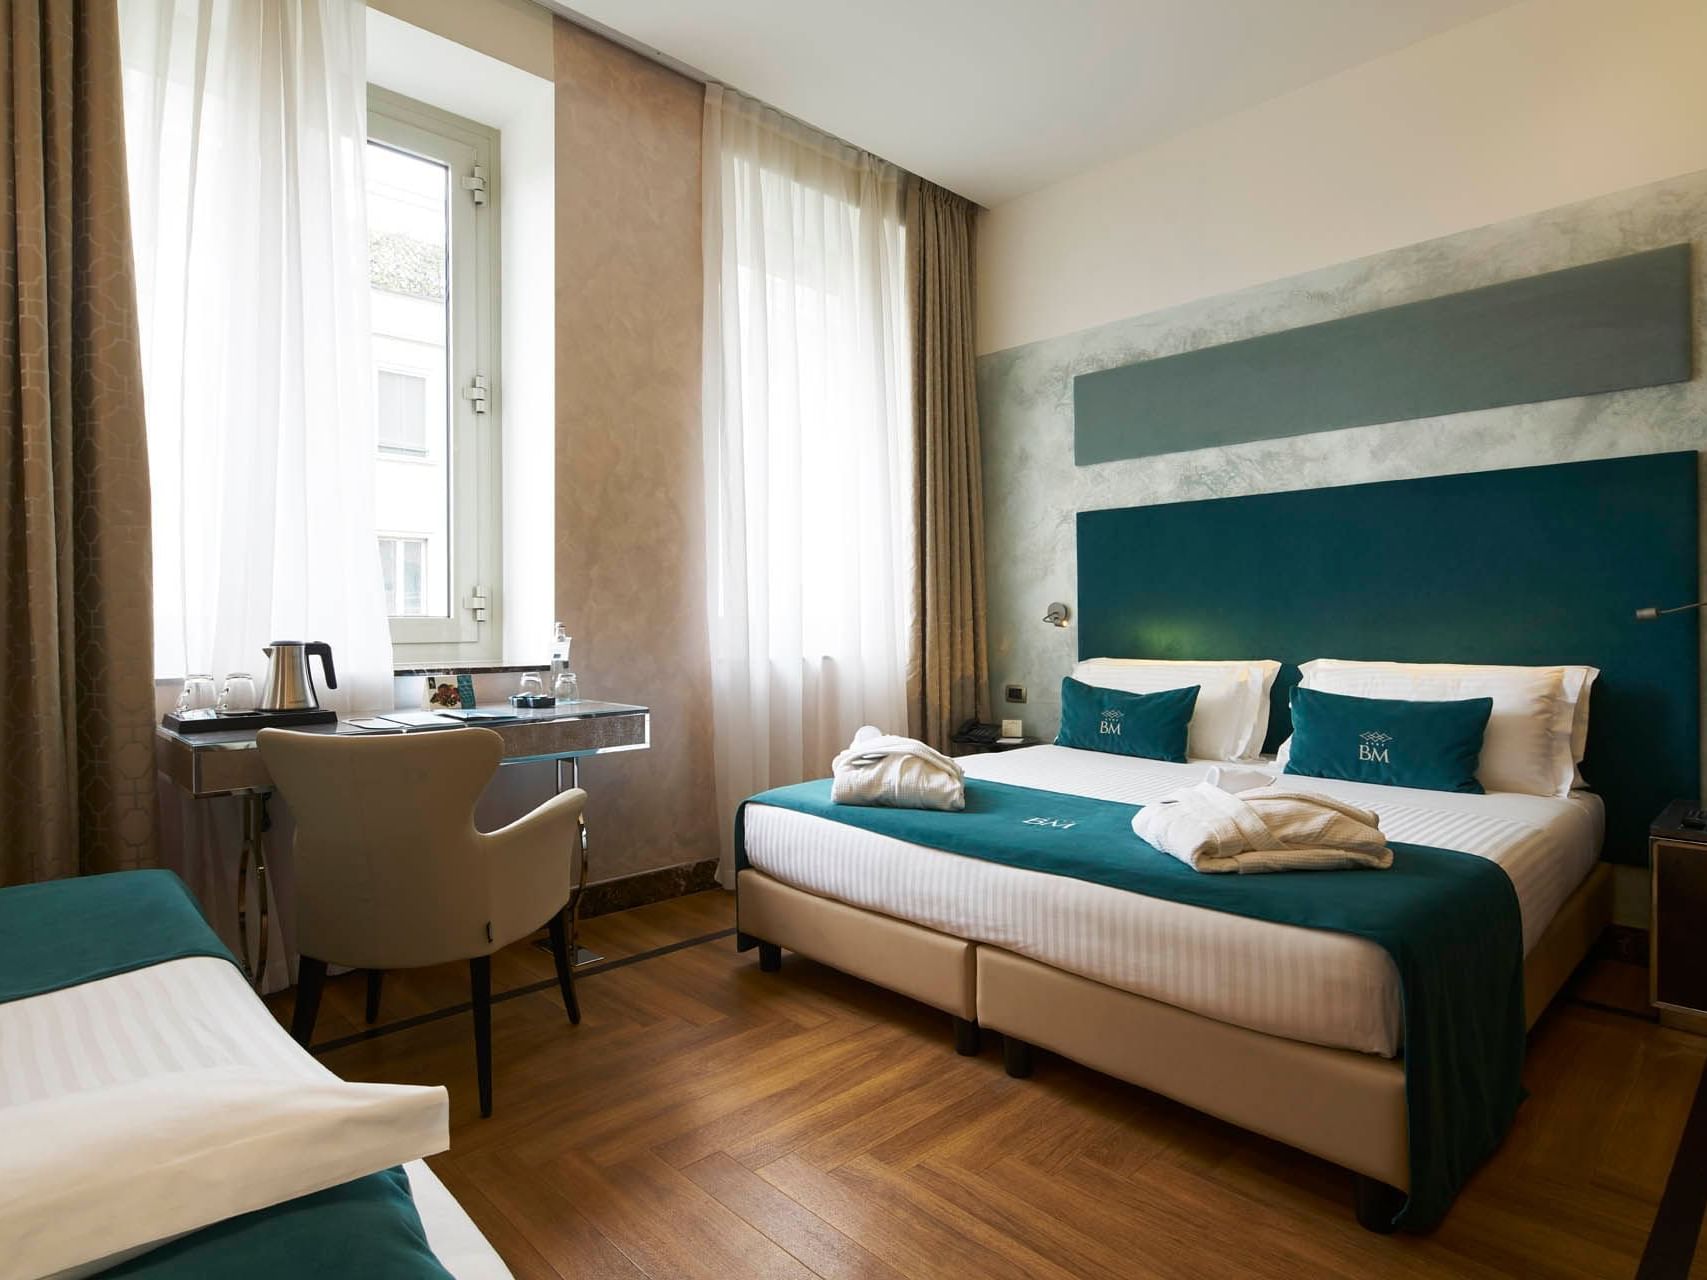 Comfort family room at Bianca Maria Palace Hotel in Milan